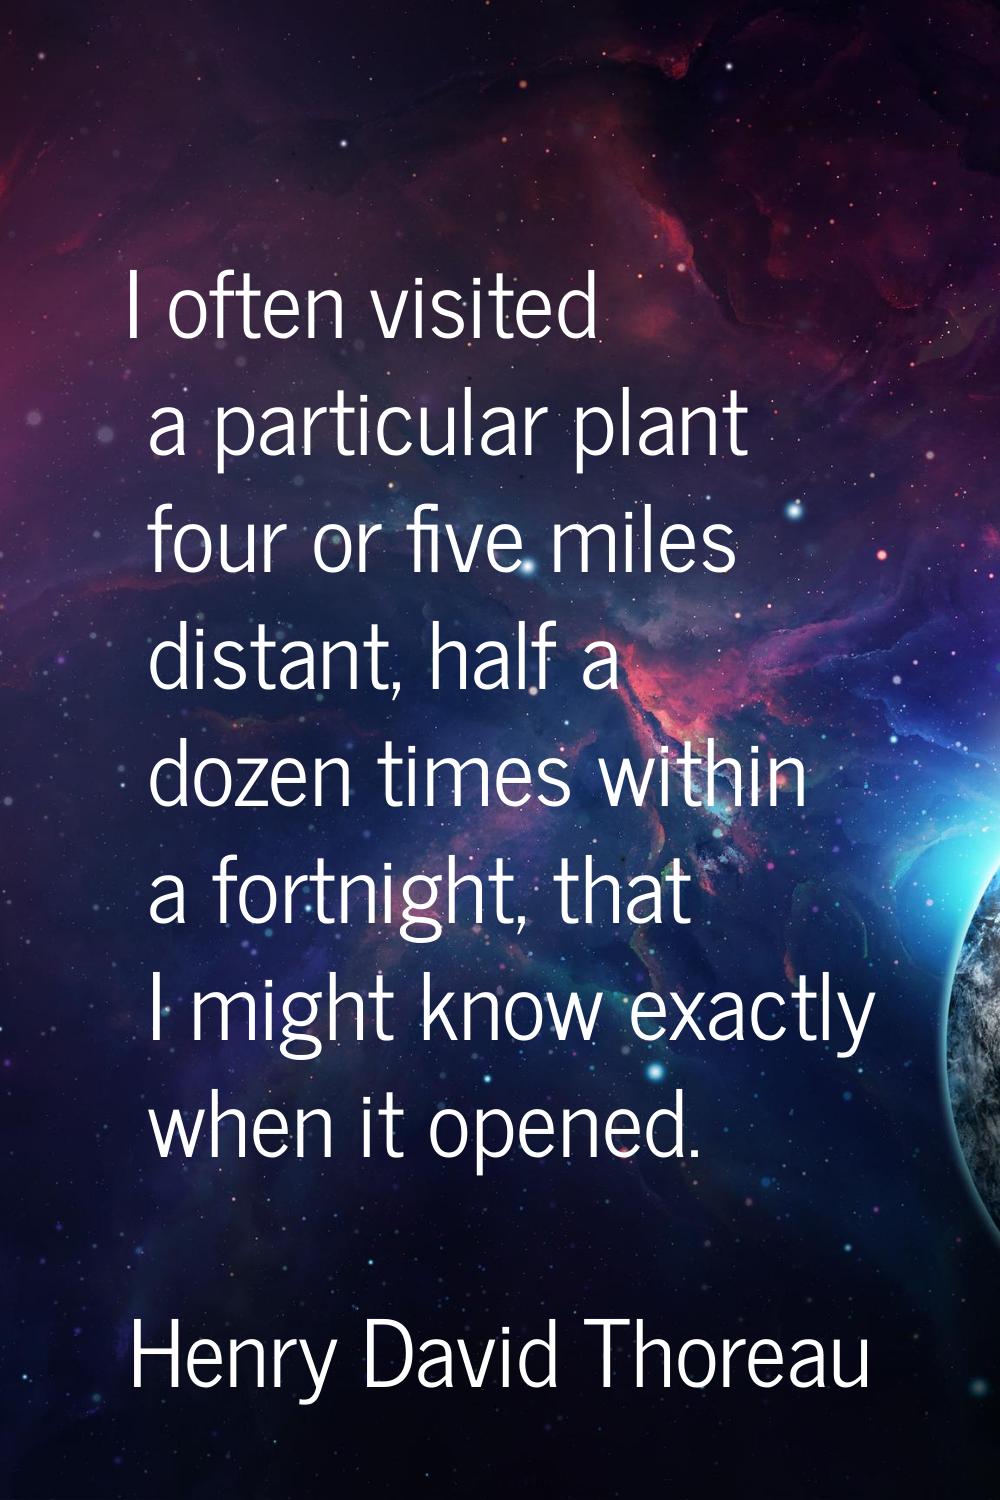 I often visited a particular plant four or five miles distant, half a dozen times within a fortnigh